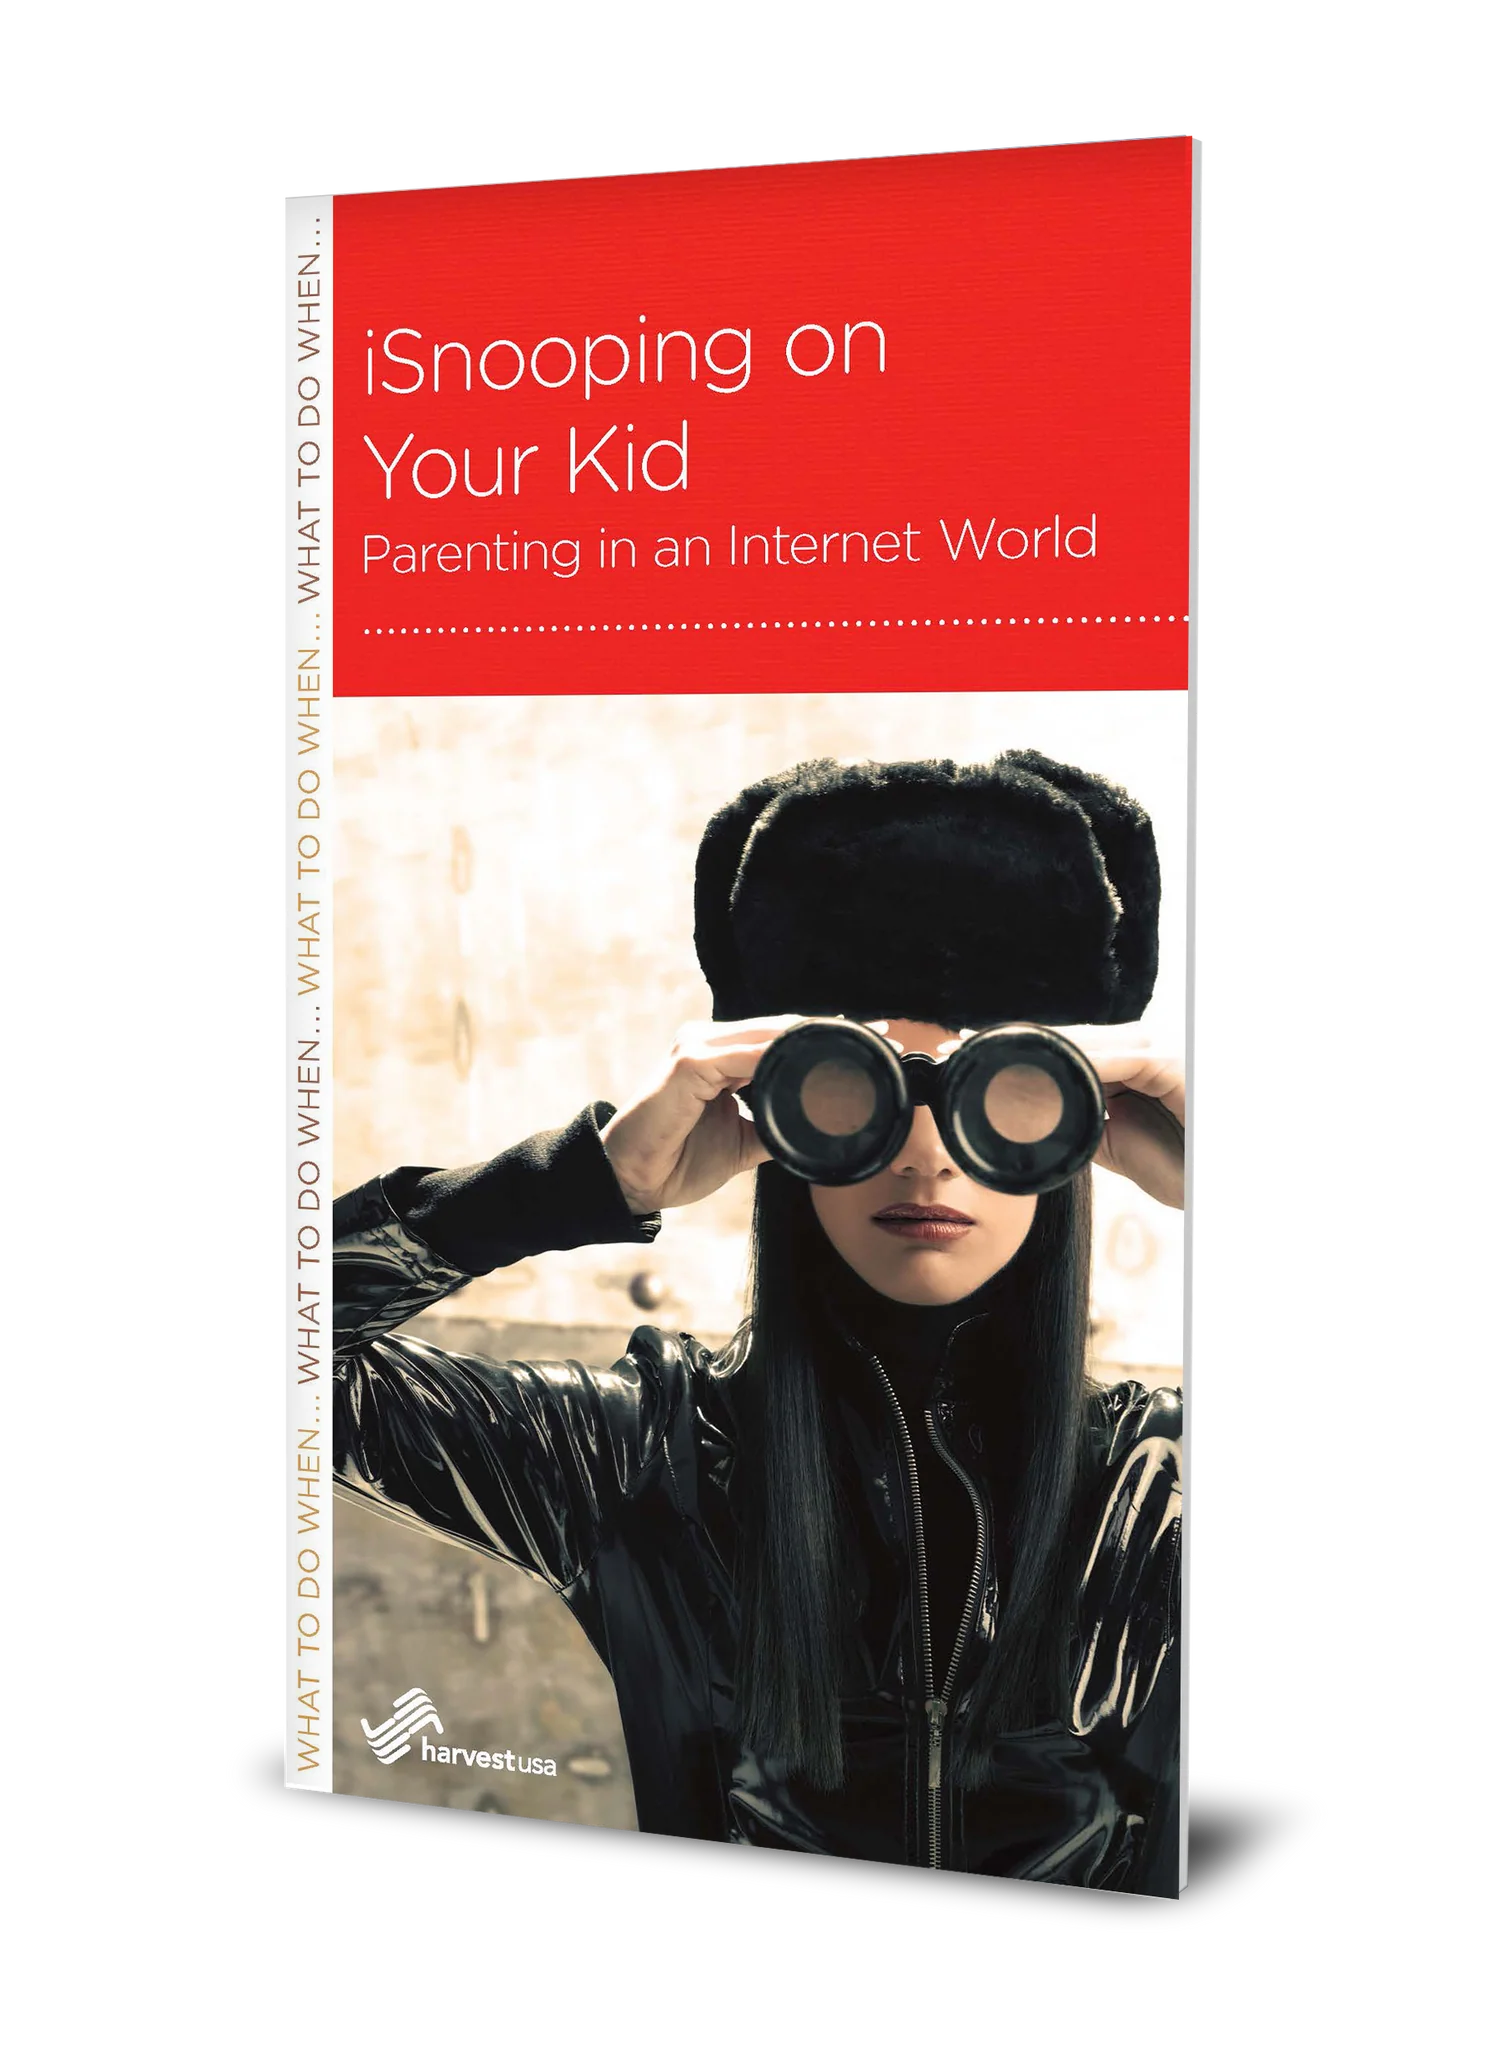 iSnooping on Your Kid: Parenting in an Internet World (Minibook)